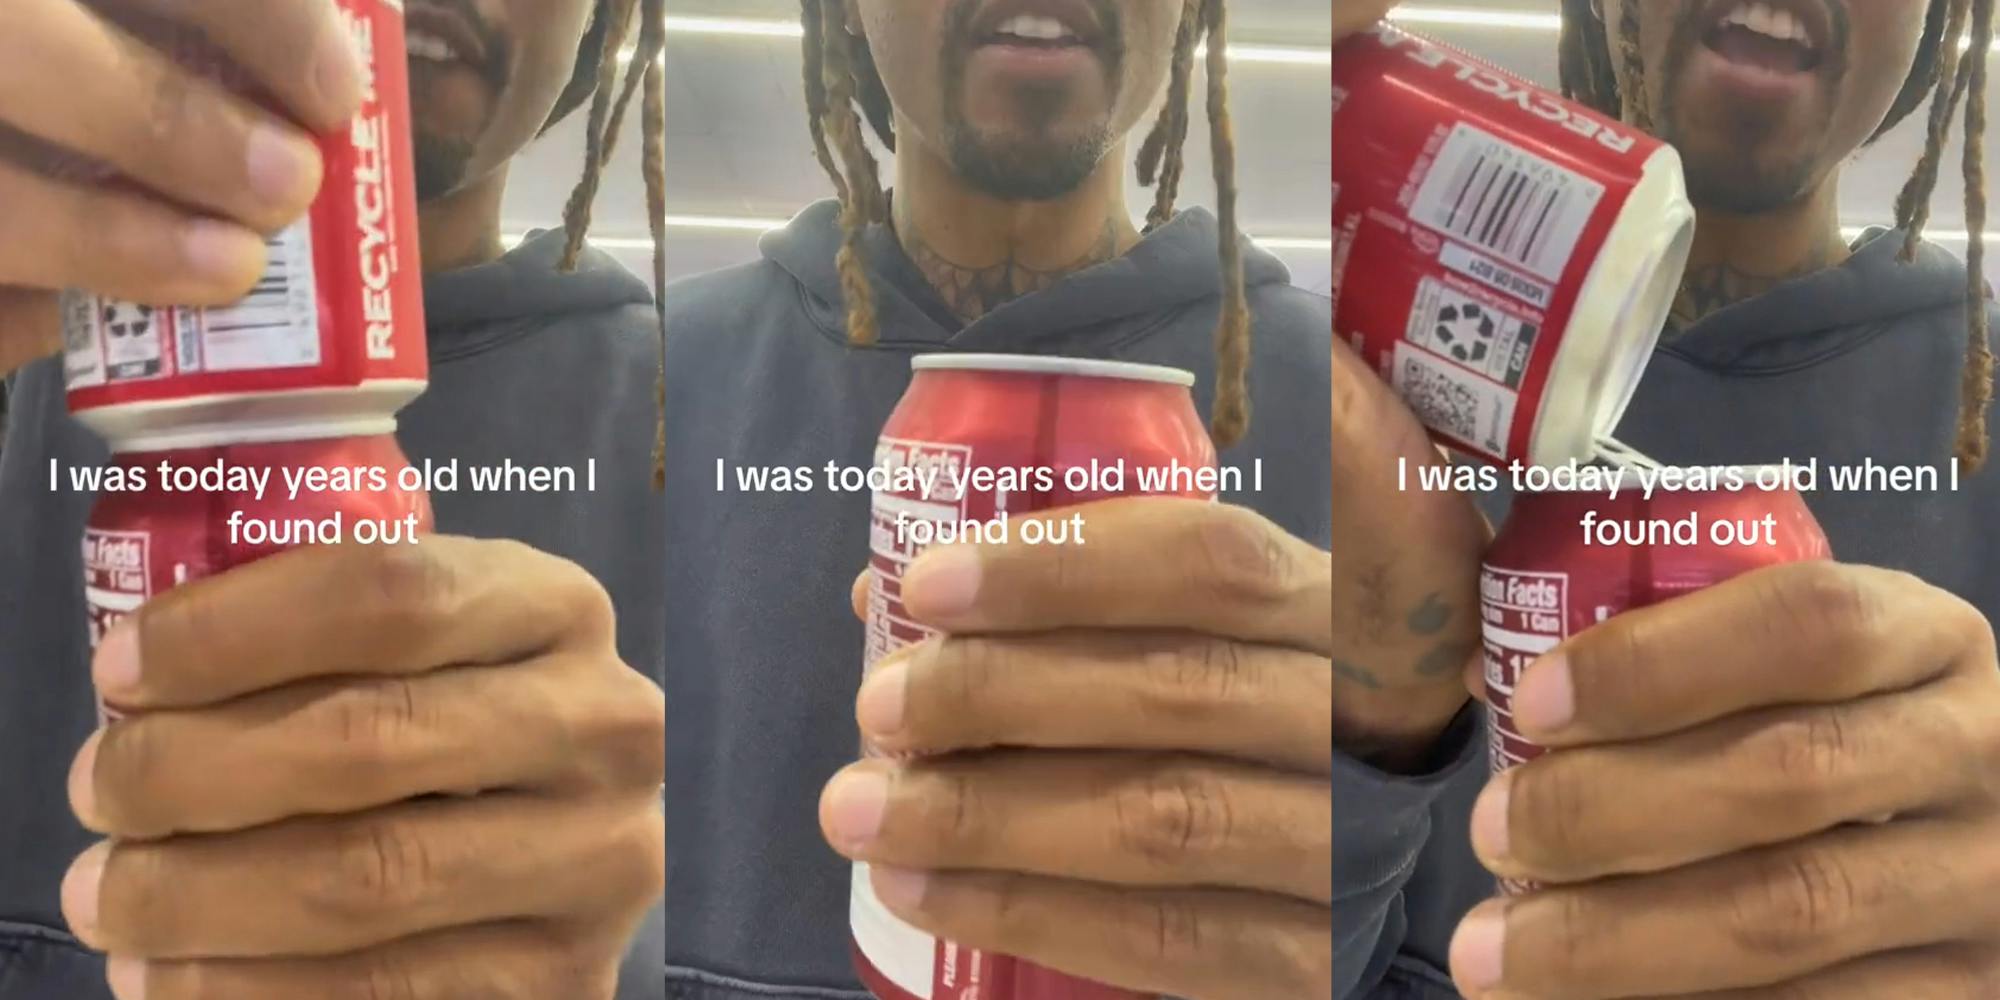 Man ‘finds out’ how to properly open soda cans